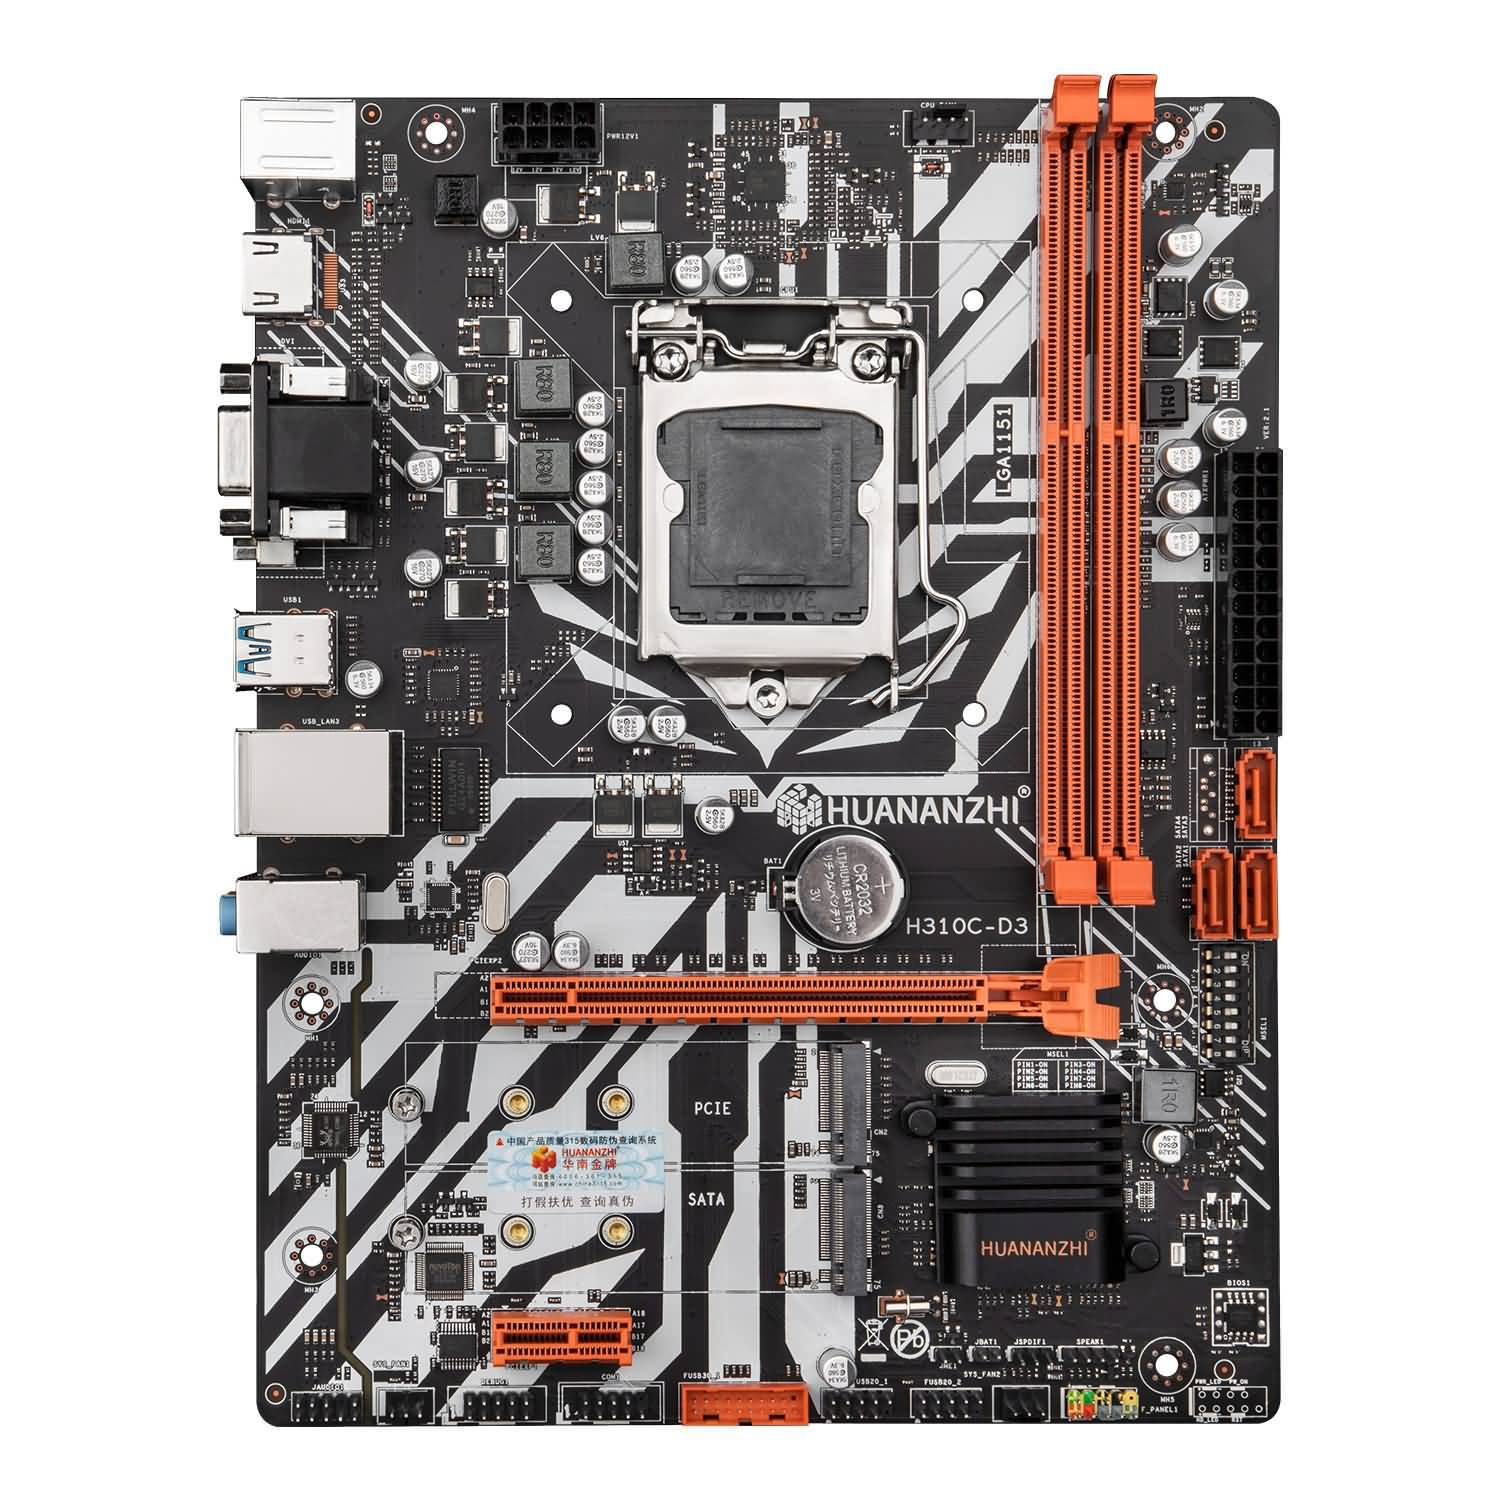 Download Huananzhi H310C-D3 Motherboard Free